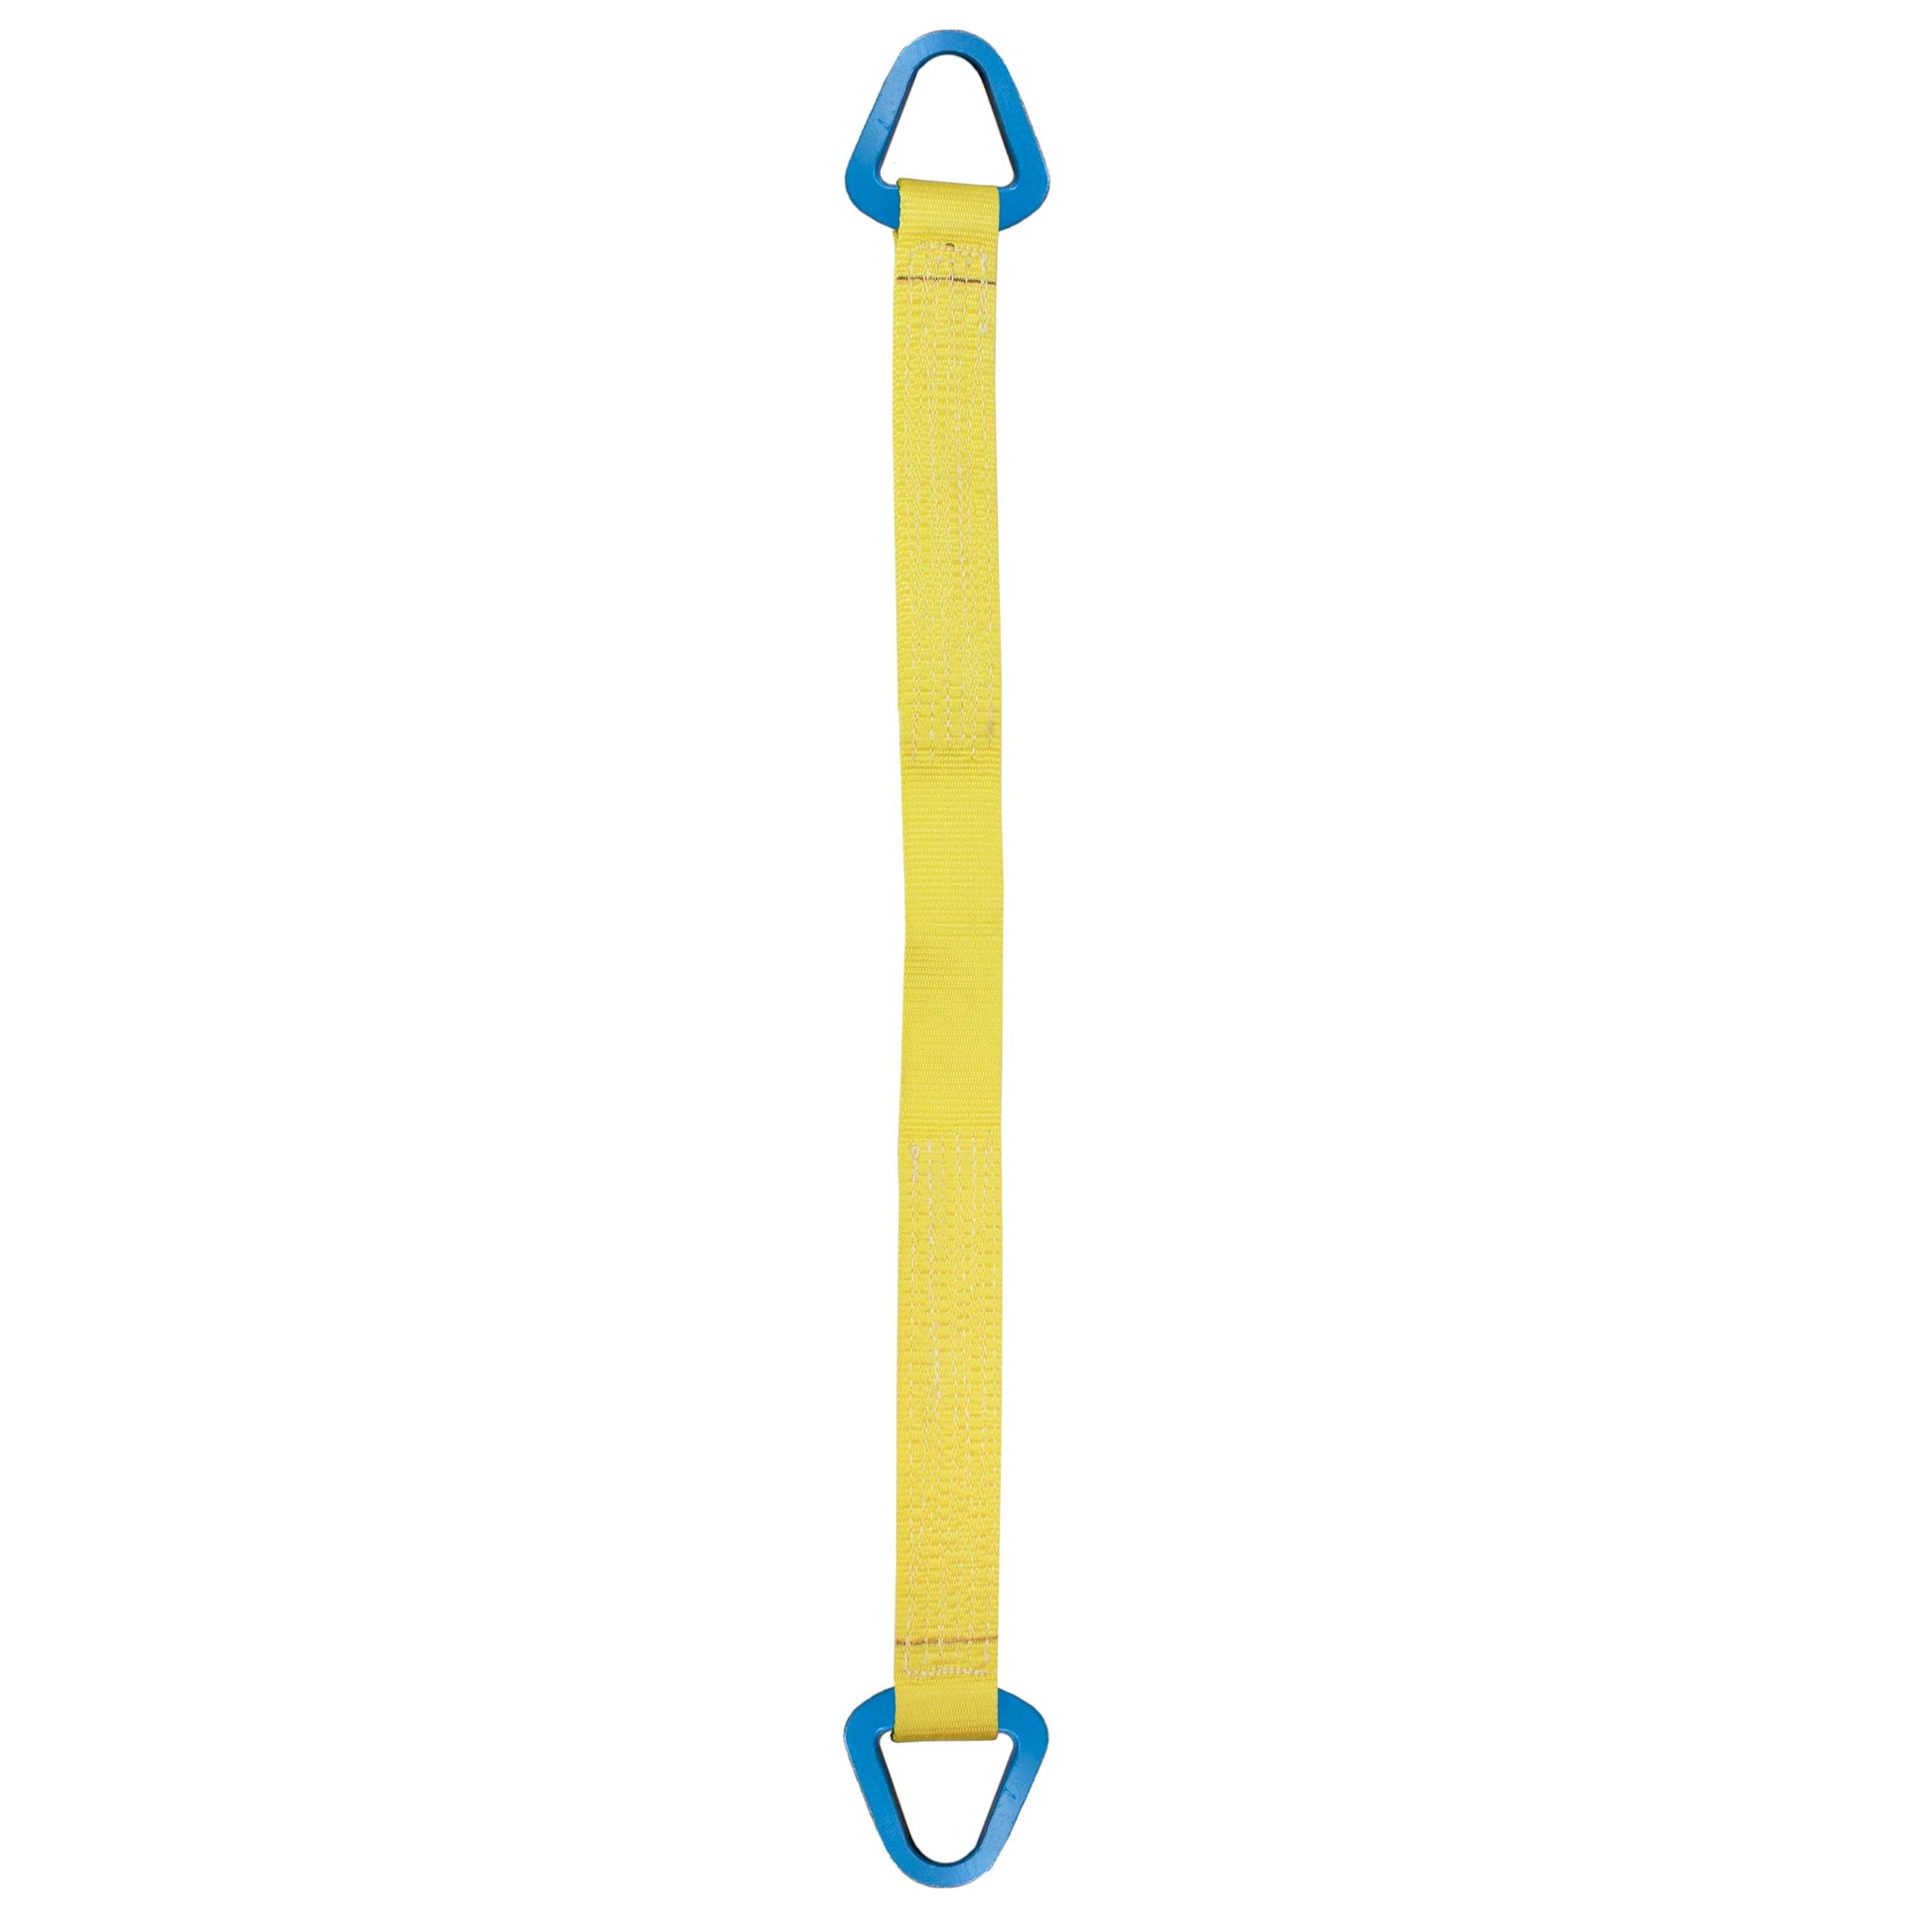 Nylon Lifting Sling Triangle 6 inch x 3 foot 1ply image 1 of 2